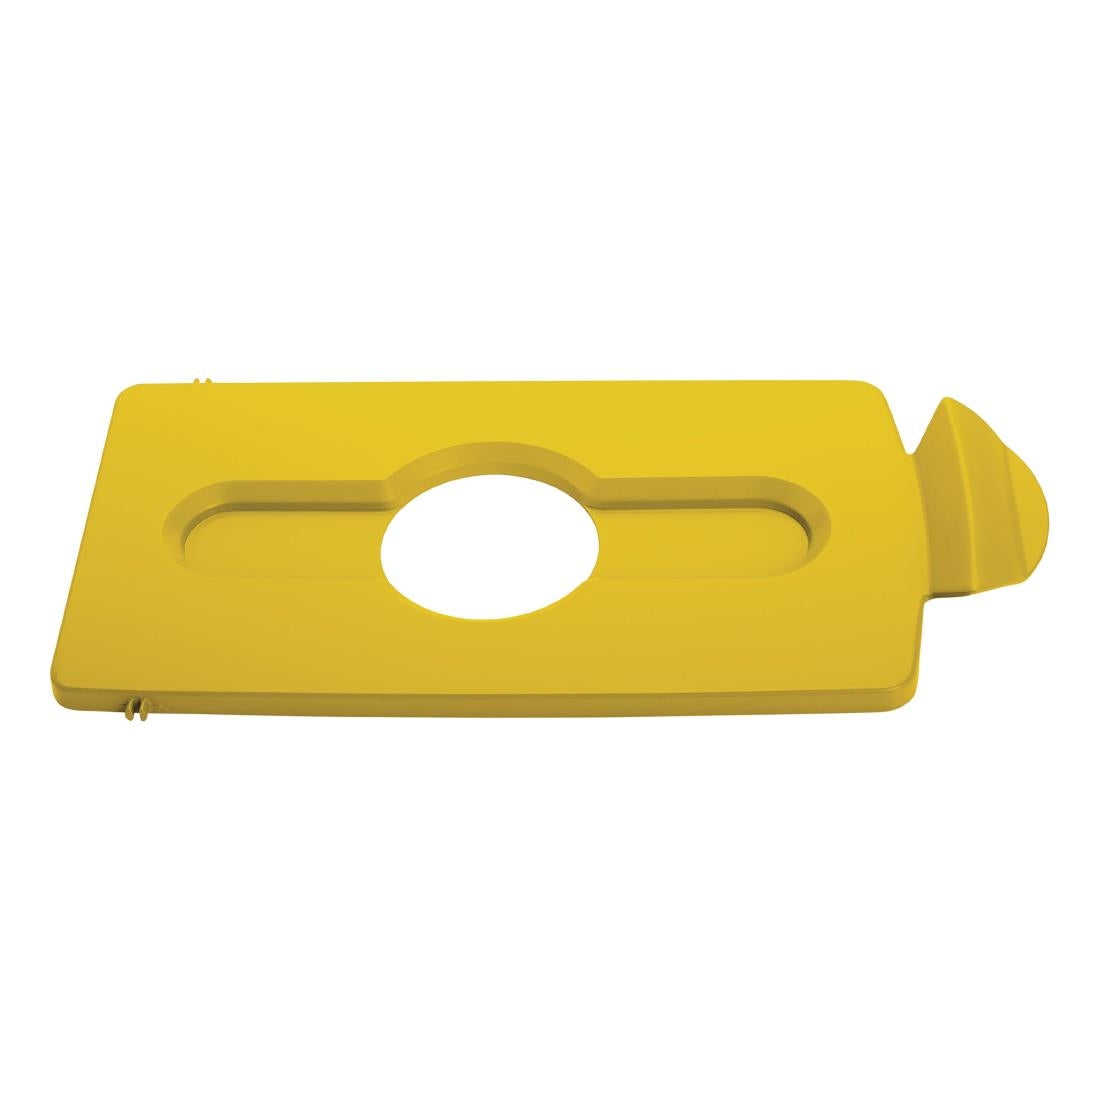 DY055 Rubbermaid SJRS Stream Topper Lid for Bottles and Cans Yellow JD Catering Equipment Solutions Ltd